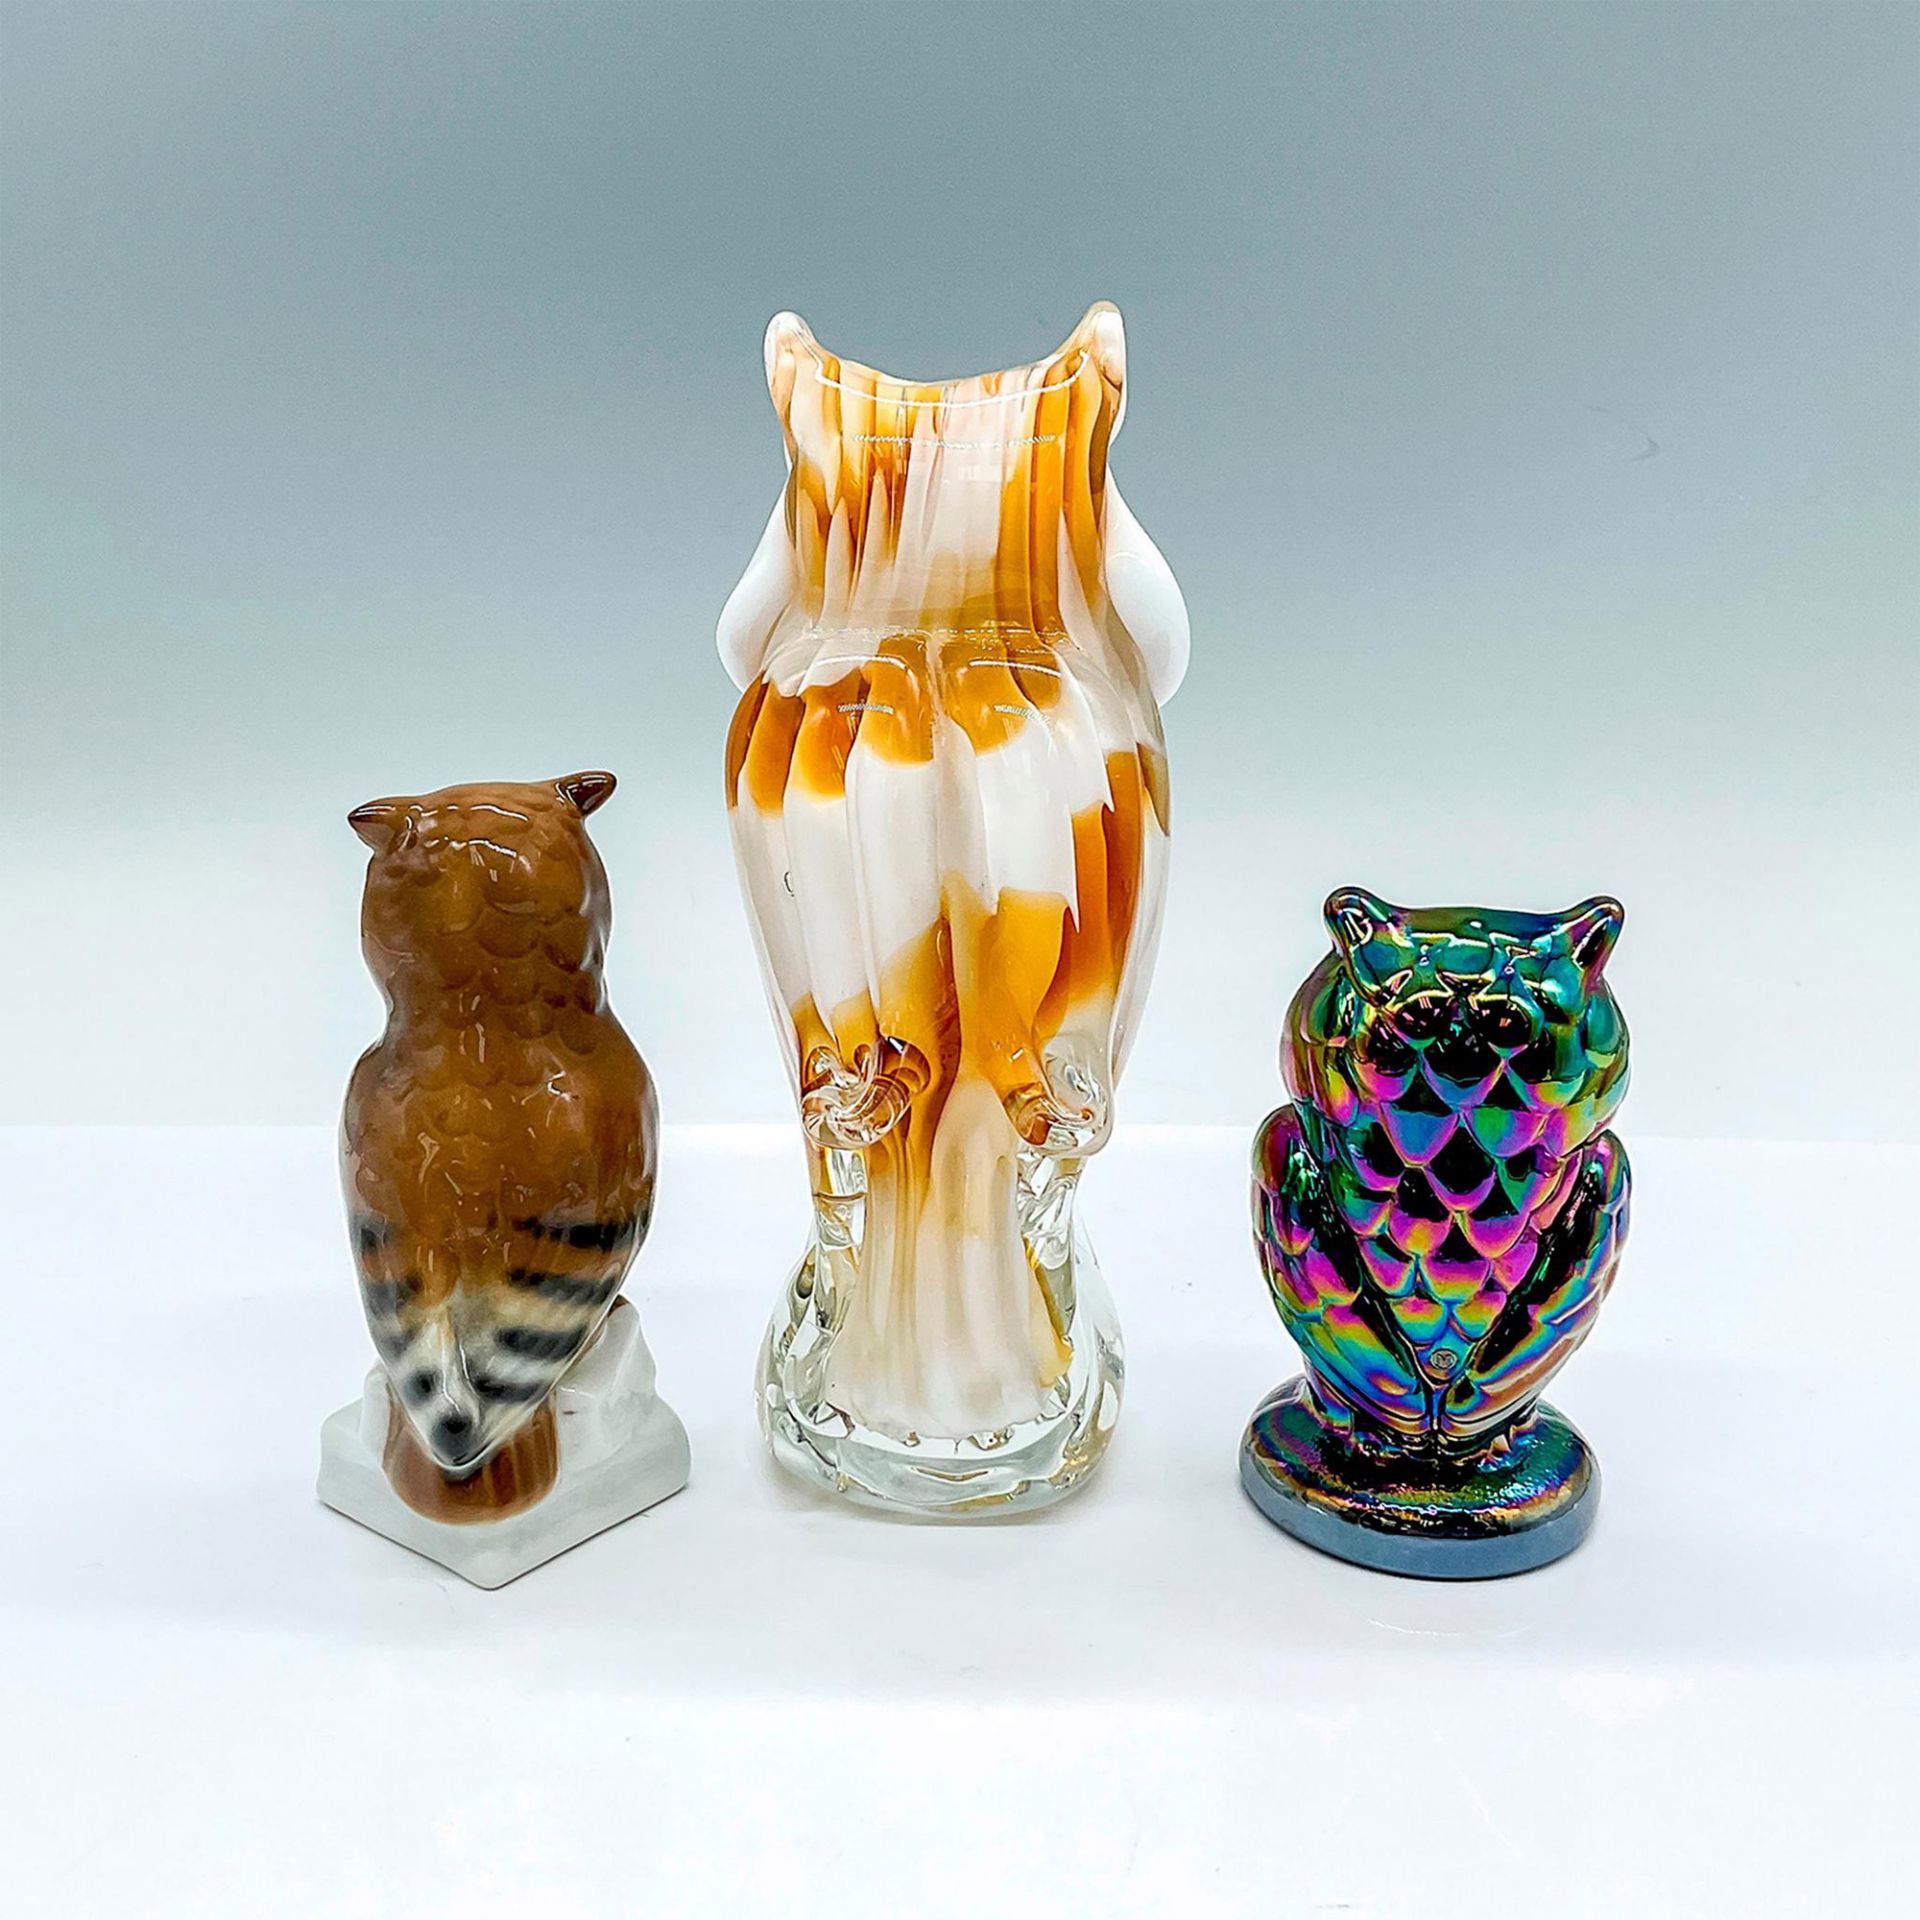 3pc Assorted Owl Figurines - Image 2 of 3